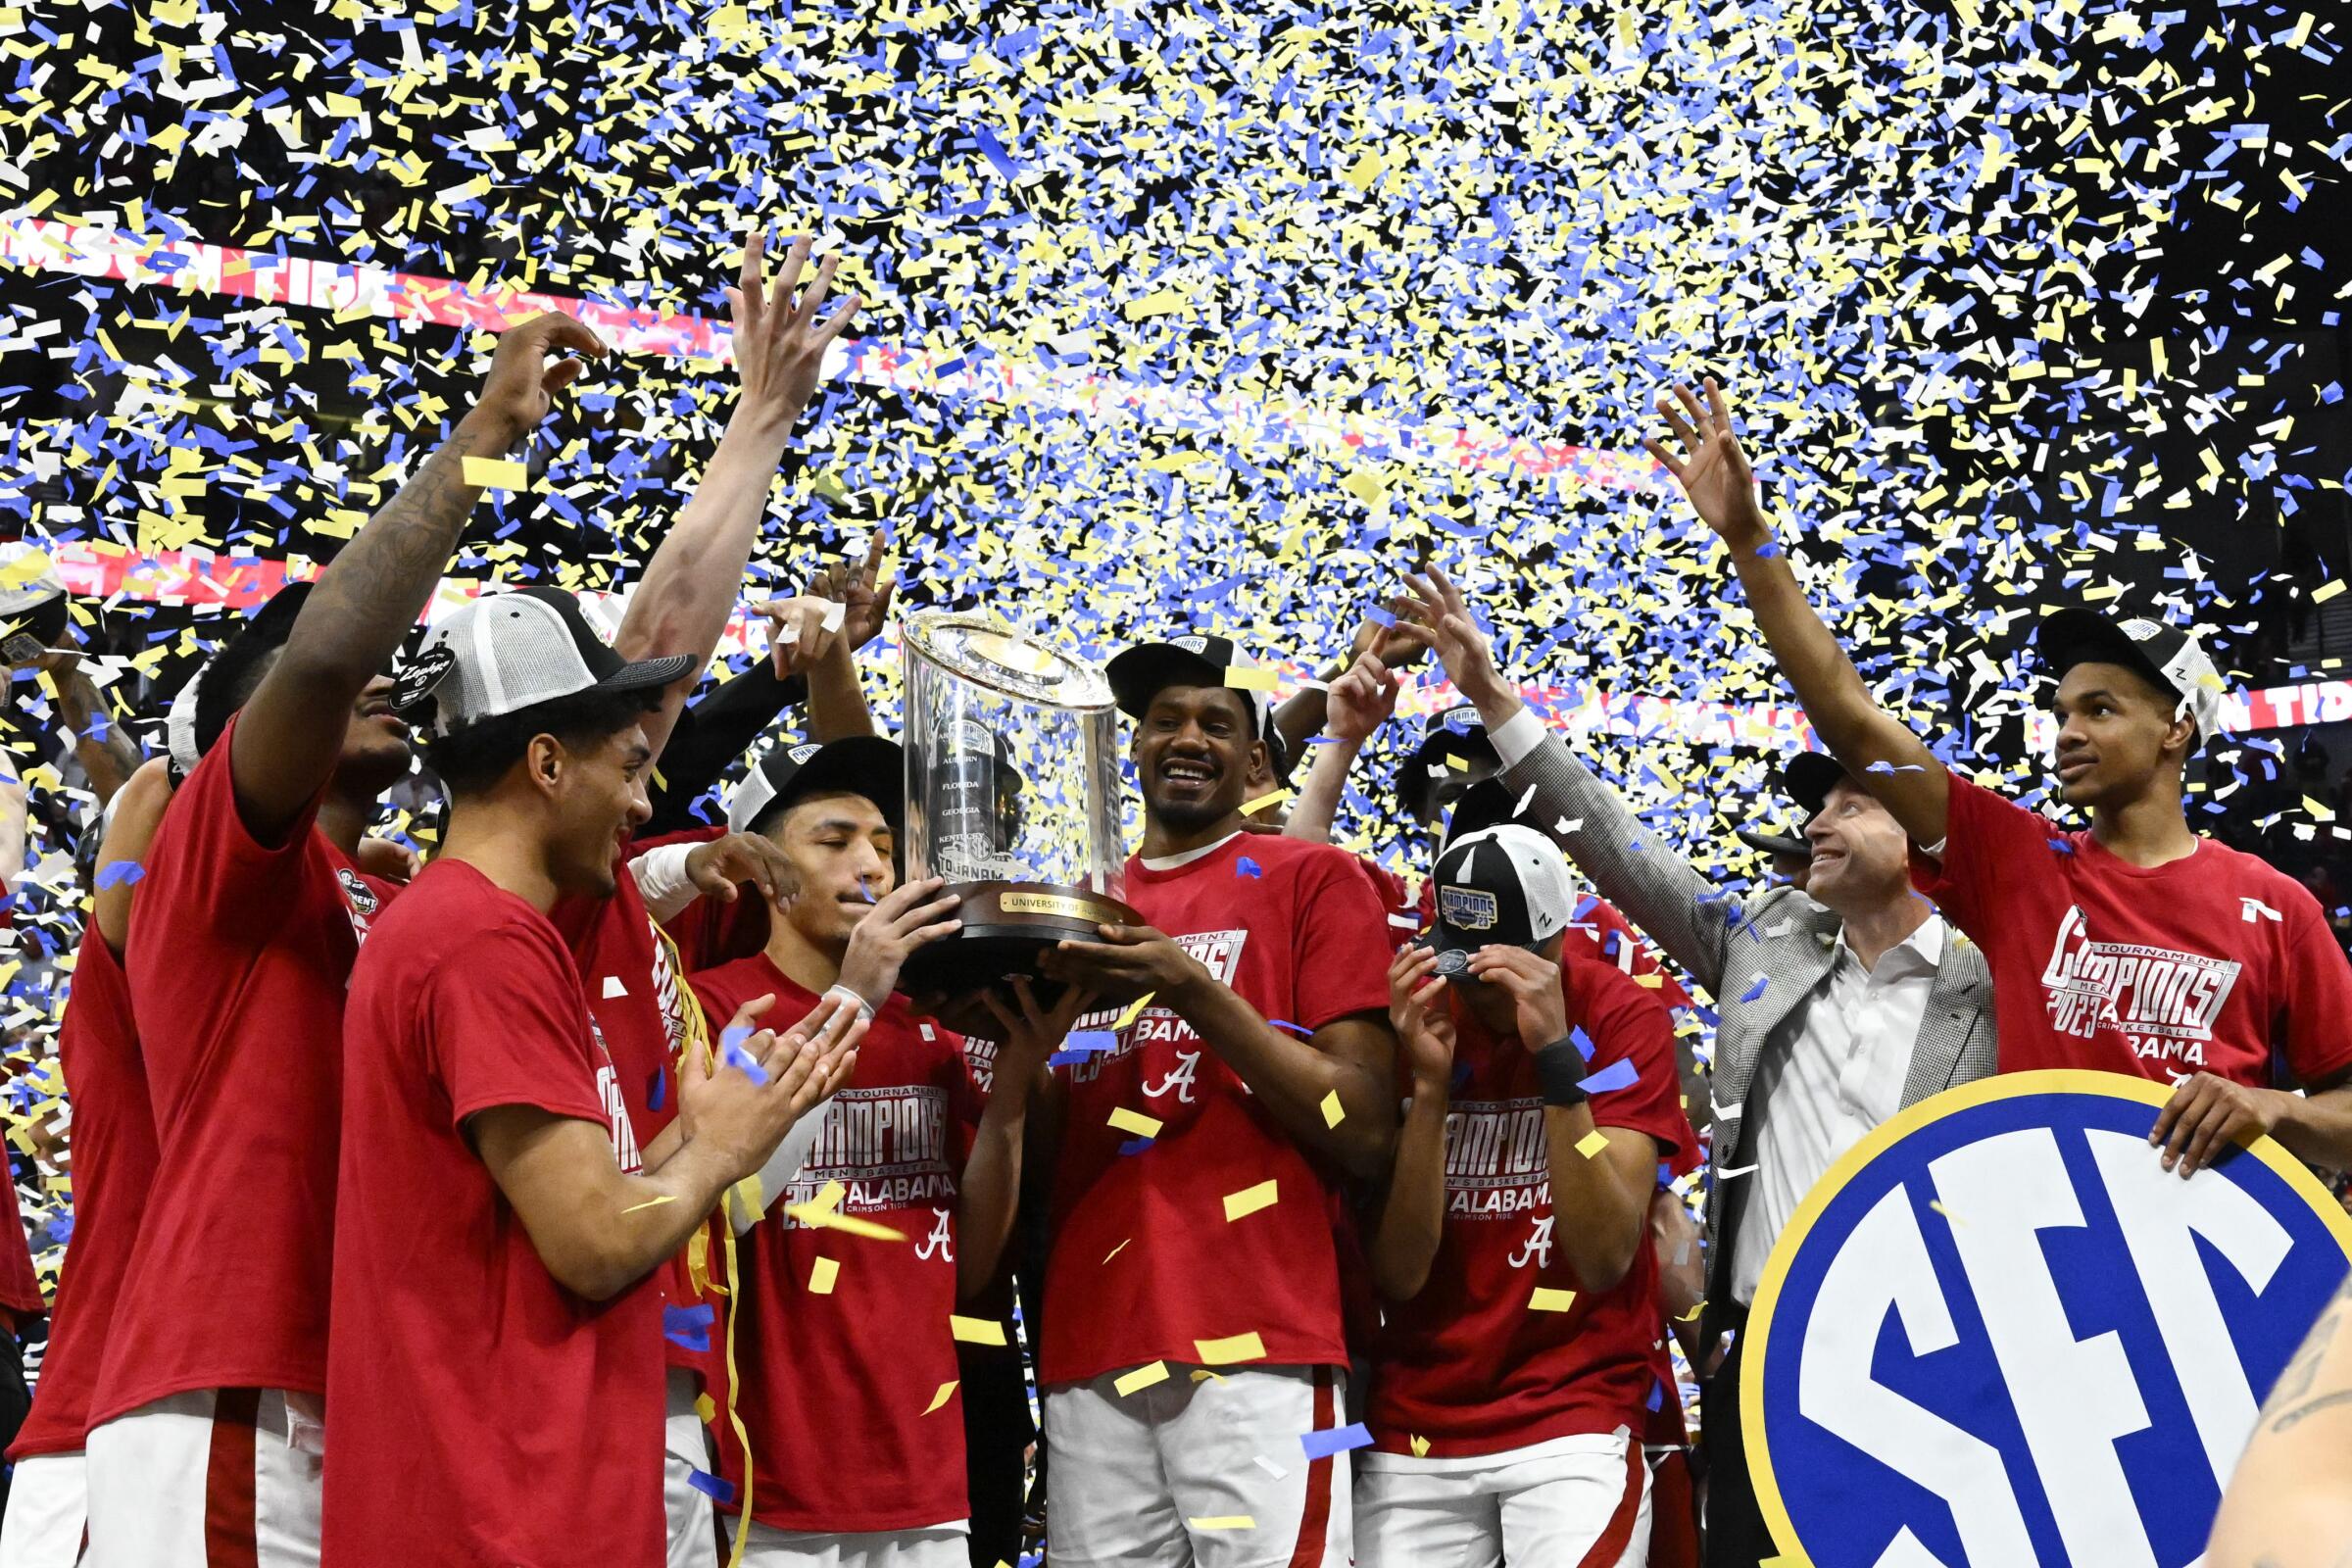 Alabama players celebrate after winning the Southeastern Conference title on March 12.